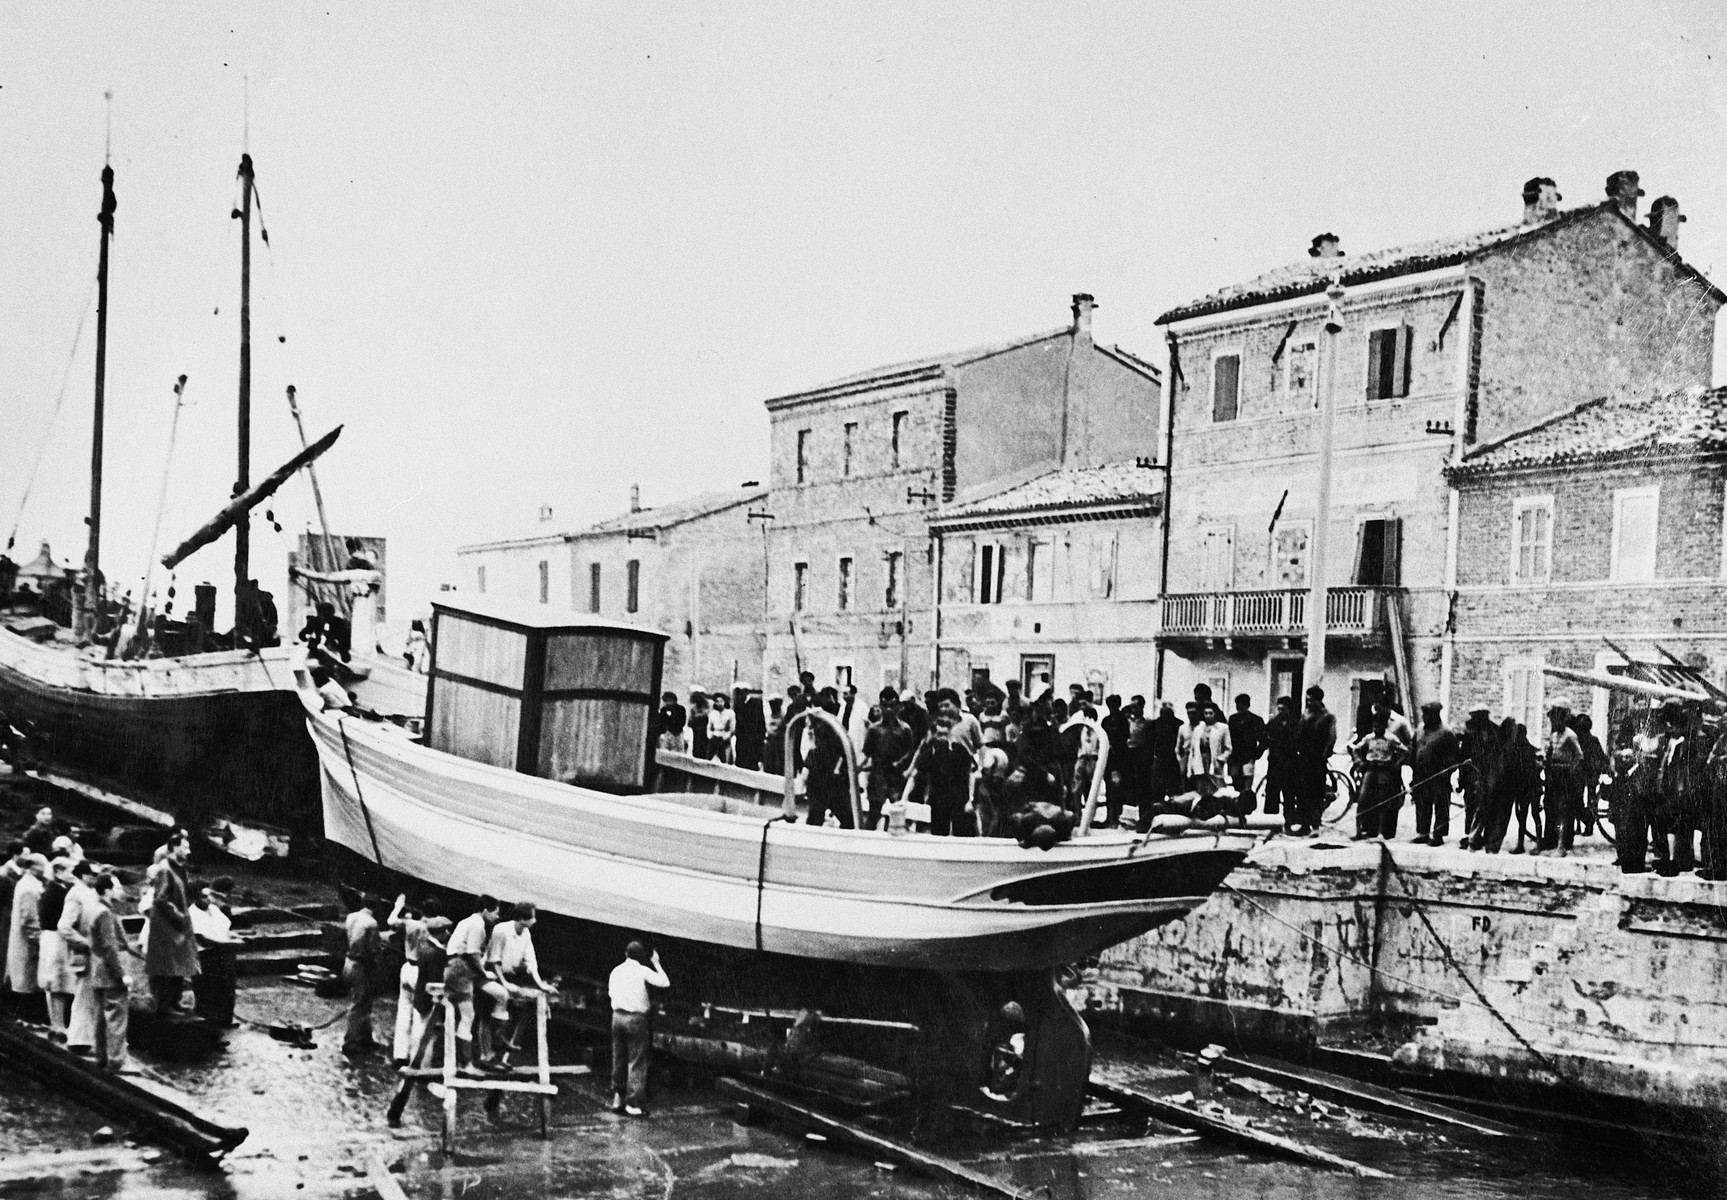 Jewish DPs gather on the pier alongside their newly constructed fishing boat during its christening ceremony at the Migdalor hachshara, a maritime Zionist collective in Fano, Italy.